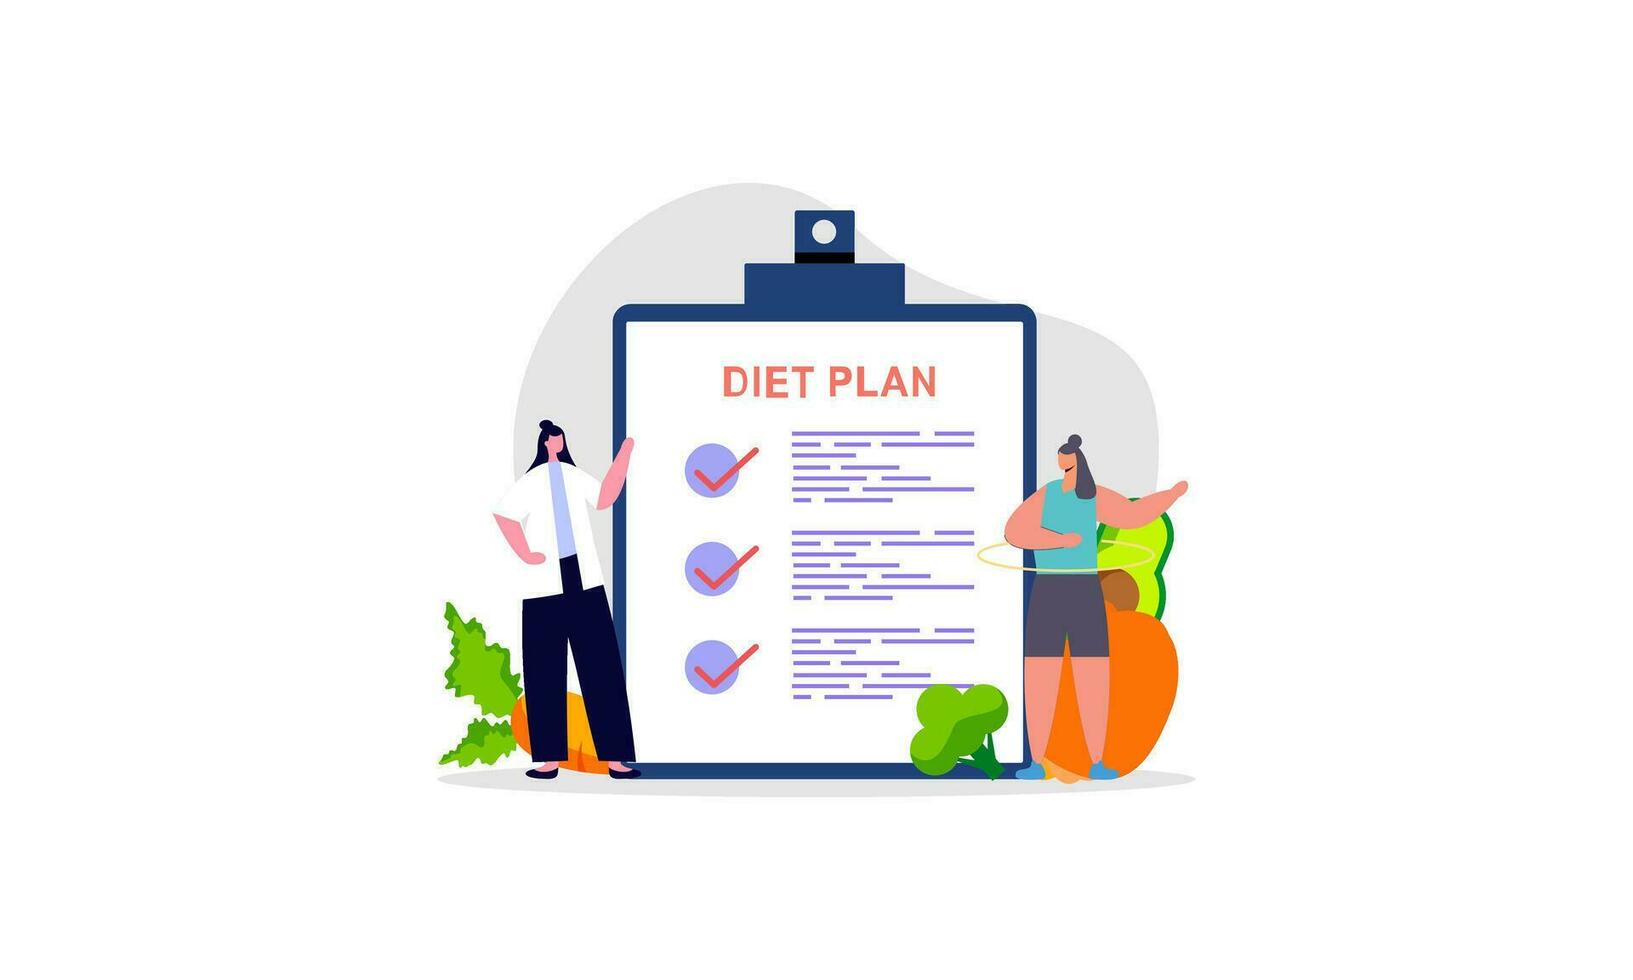 Diet plan checklist illustration. People doing exercise, training and planning diet with fruit and vegetable. vector